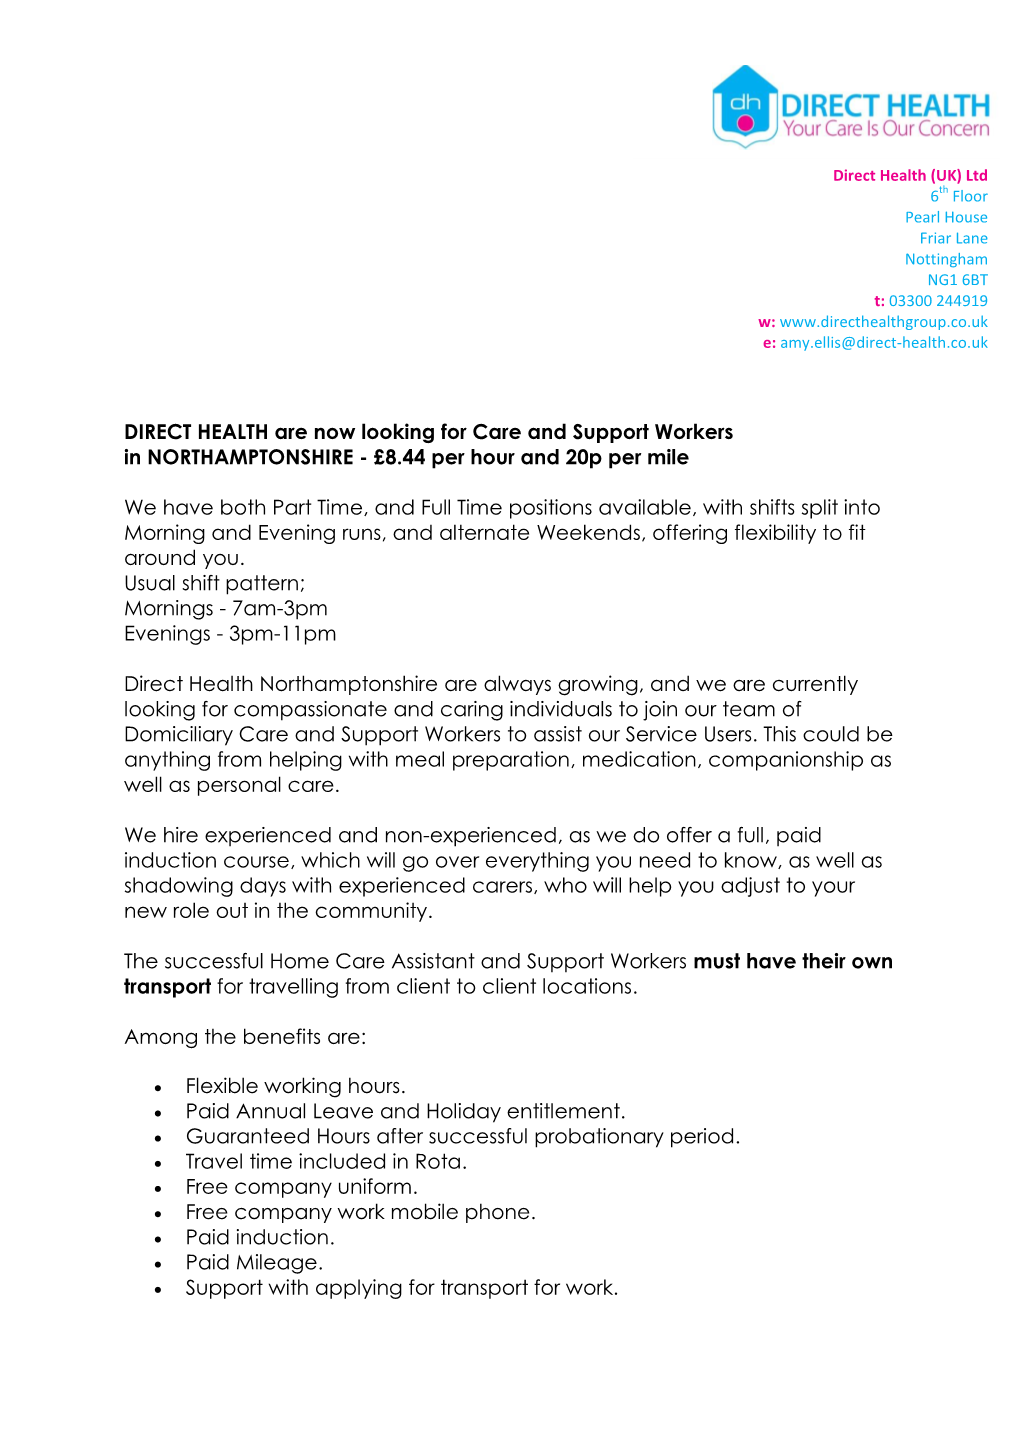 DIRECT HEALTH Are Now Looking for Care and Support Workers in NORTHAMPTONSHIRE - £8.44 Per Hour and 20P Per Mile